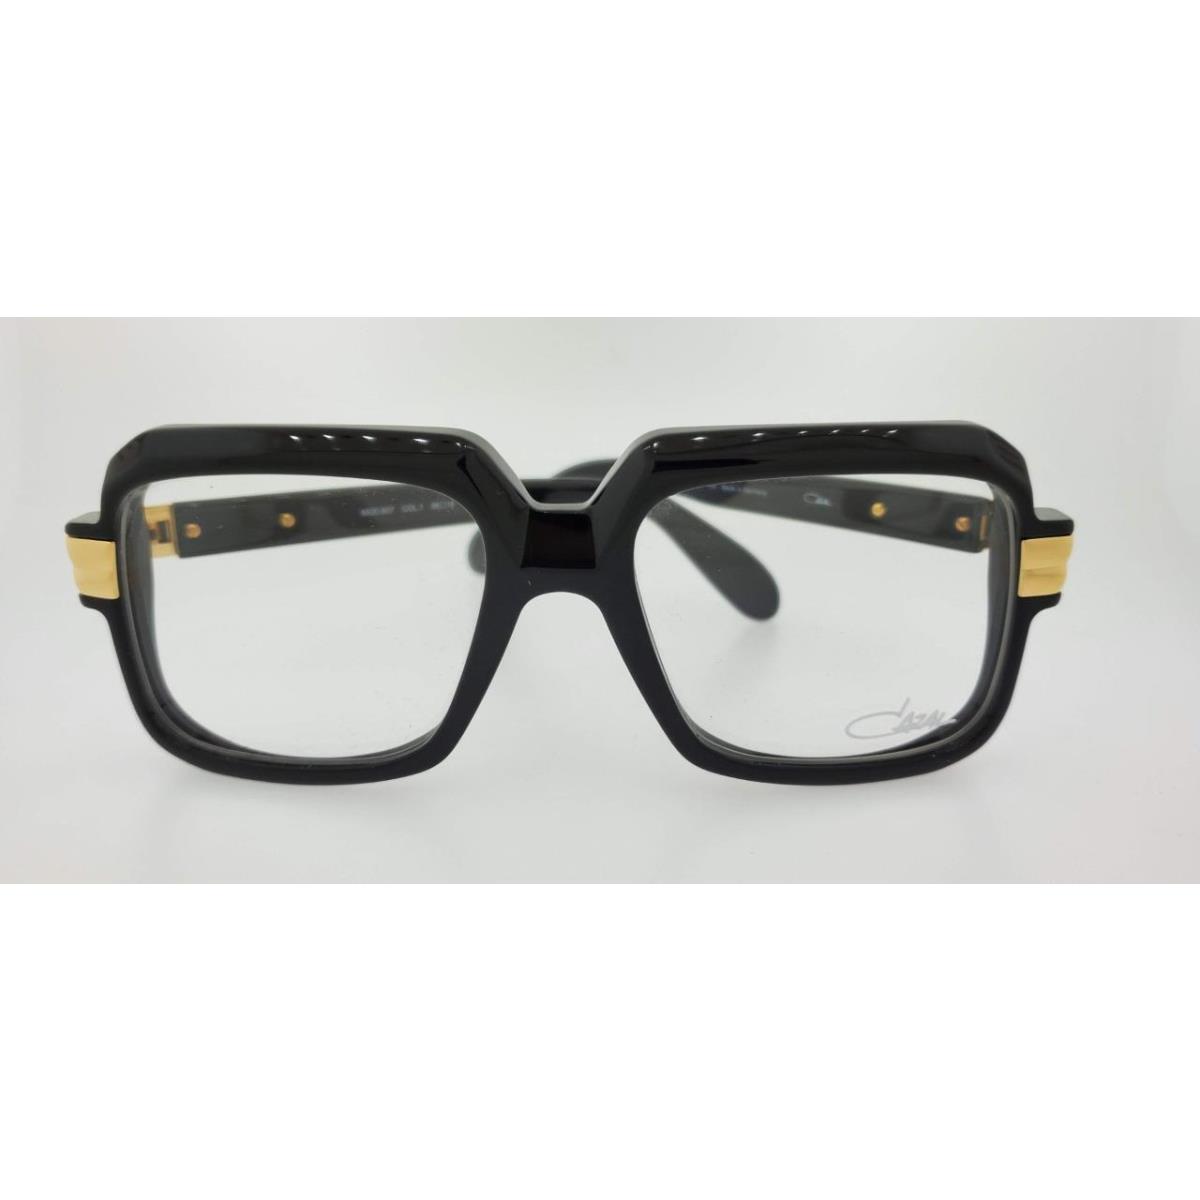 Cazal 607 001 56MM Black Gold Frame with Clear Demo Lenses